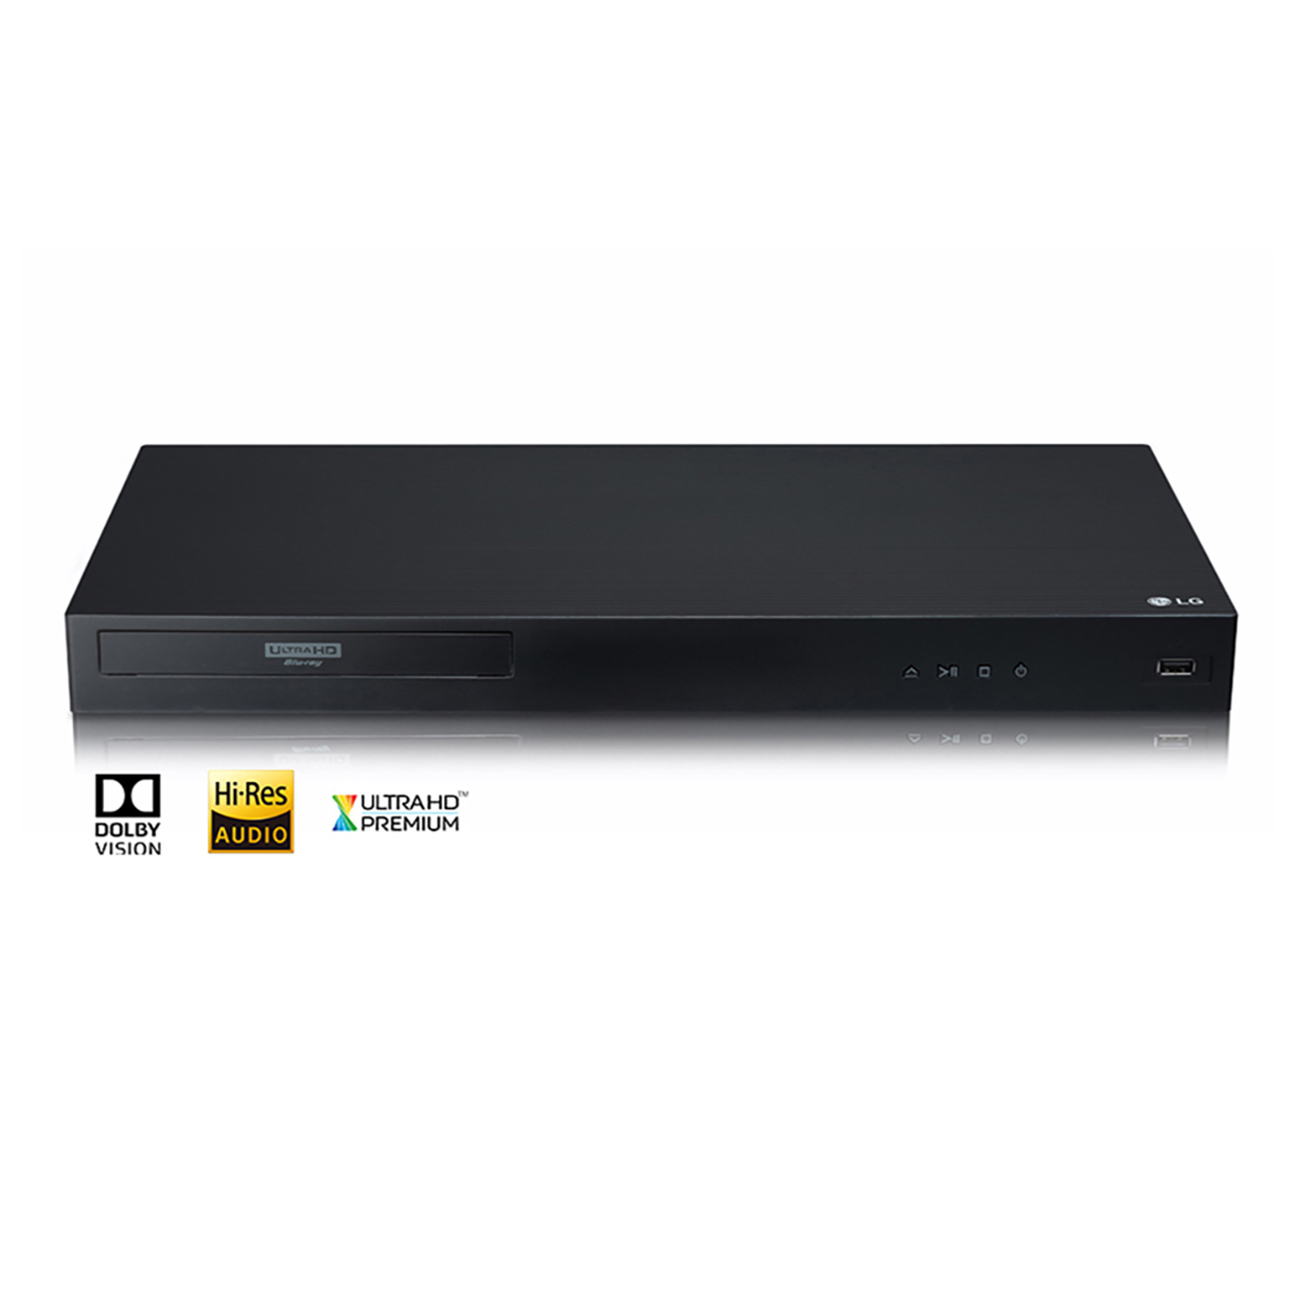 LG UBKM9 Streaming Ultra-HD Blu-Ray Player with Streaming Services and Built-in Wi-Fi® - Walmart.com $175